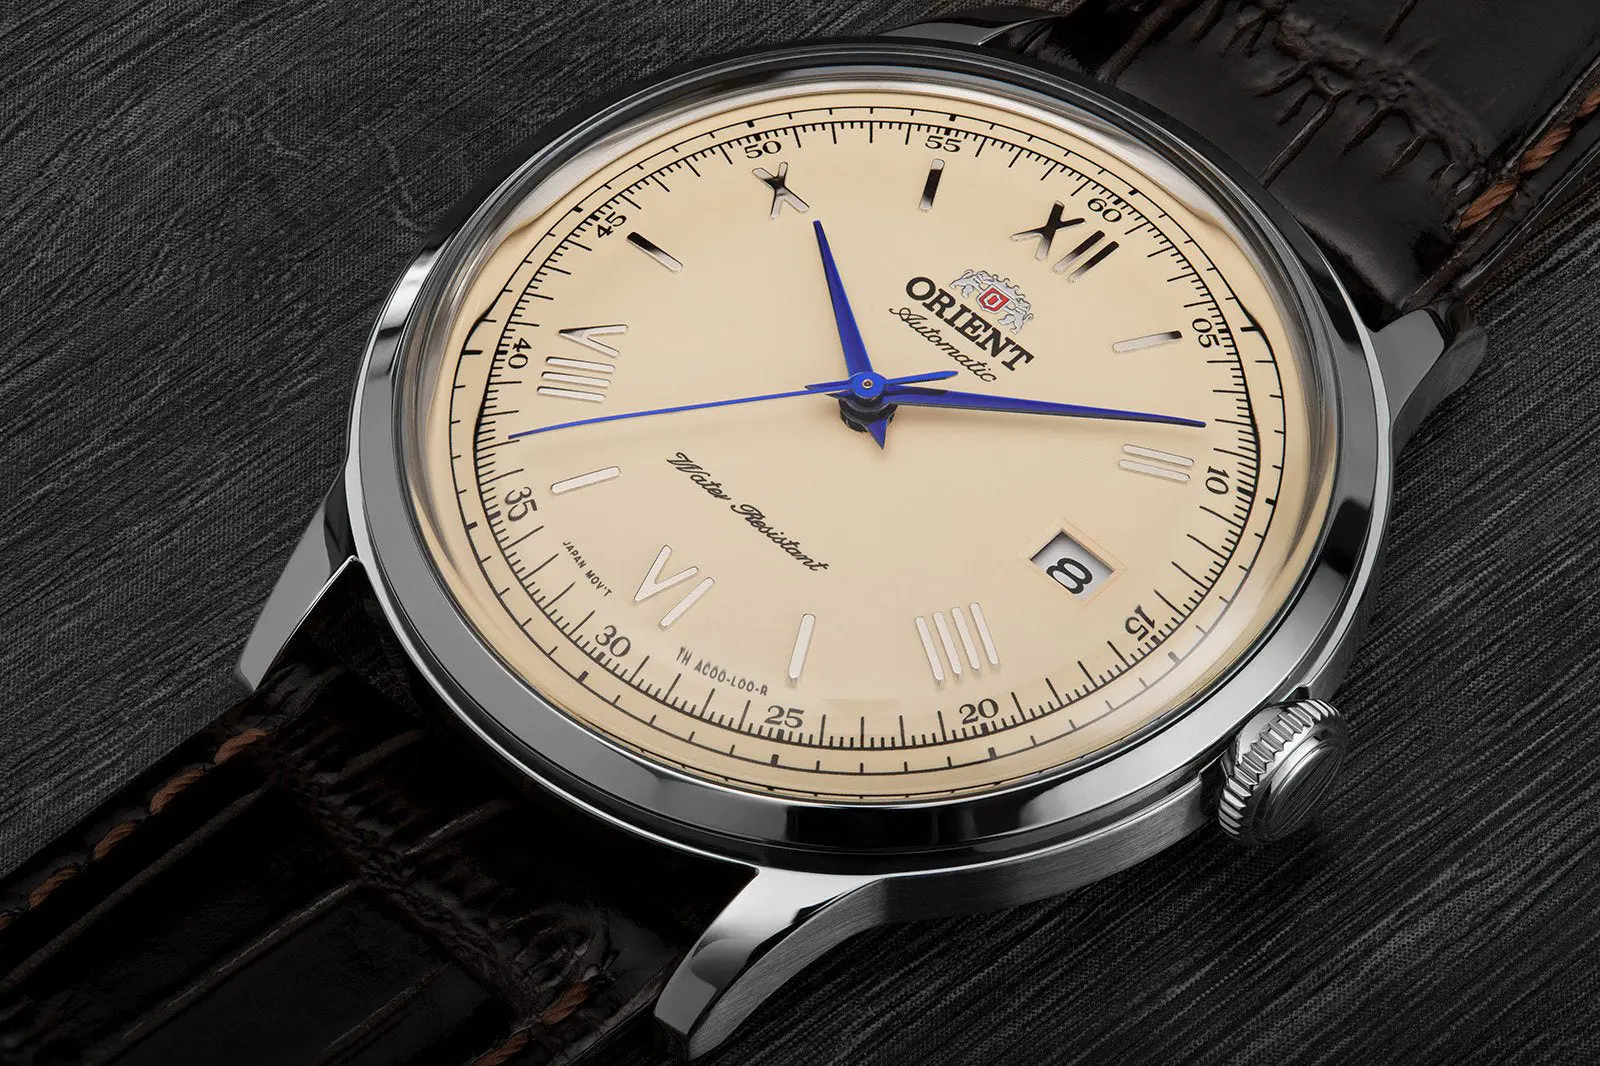 Orient Bambino Version 2 watch face slanted view